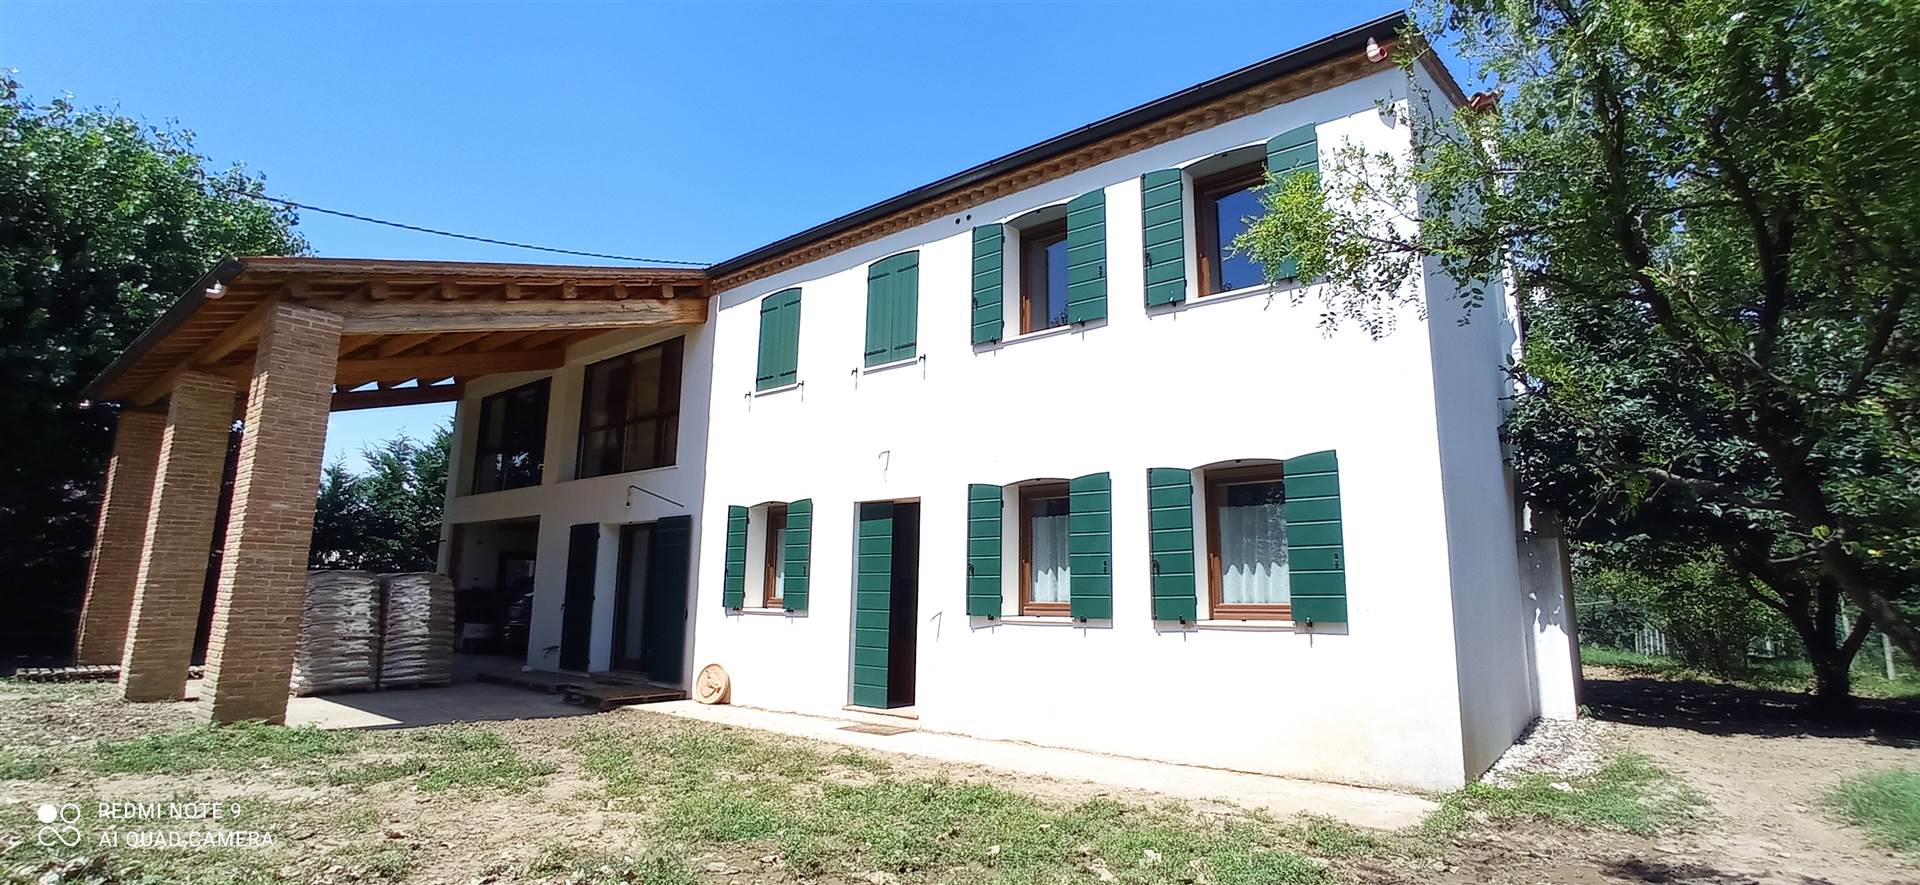 ARCOLE, Villa for sale of 260 Sq. mt., Excellent Condition, Heating To floor, Energetic class: A4, placed at Ground on 2, composed by: 10 Rooms, 